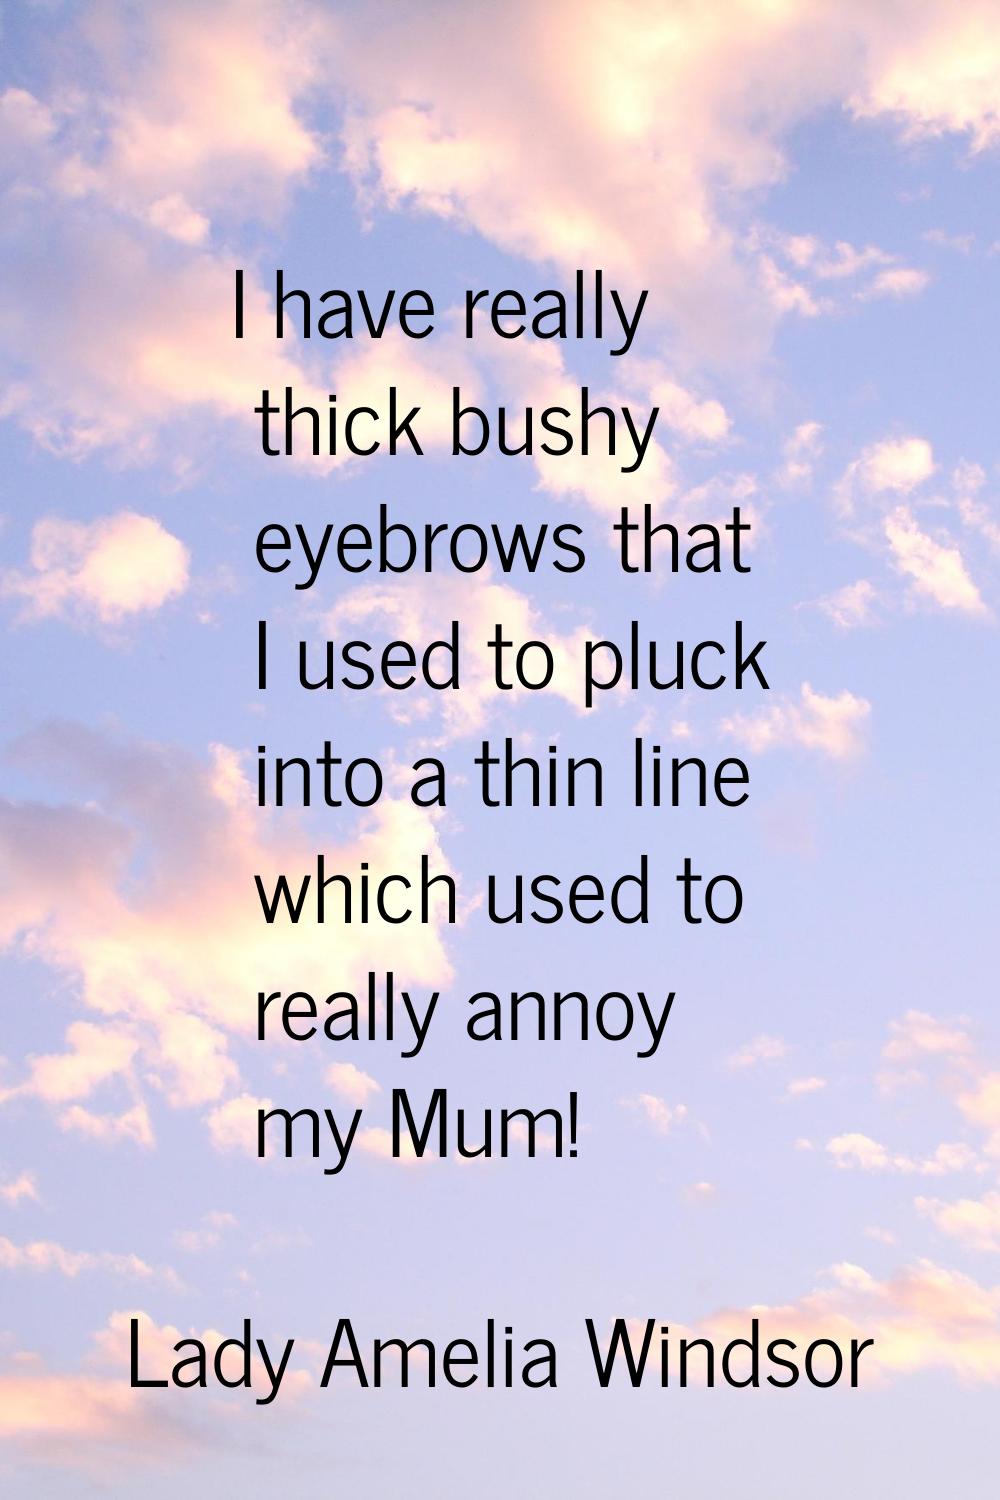 I have really thick bushy eyebrows that I used to pluck into a thin line which used to really annoy